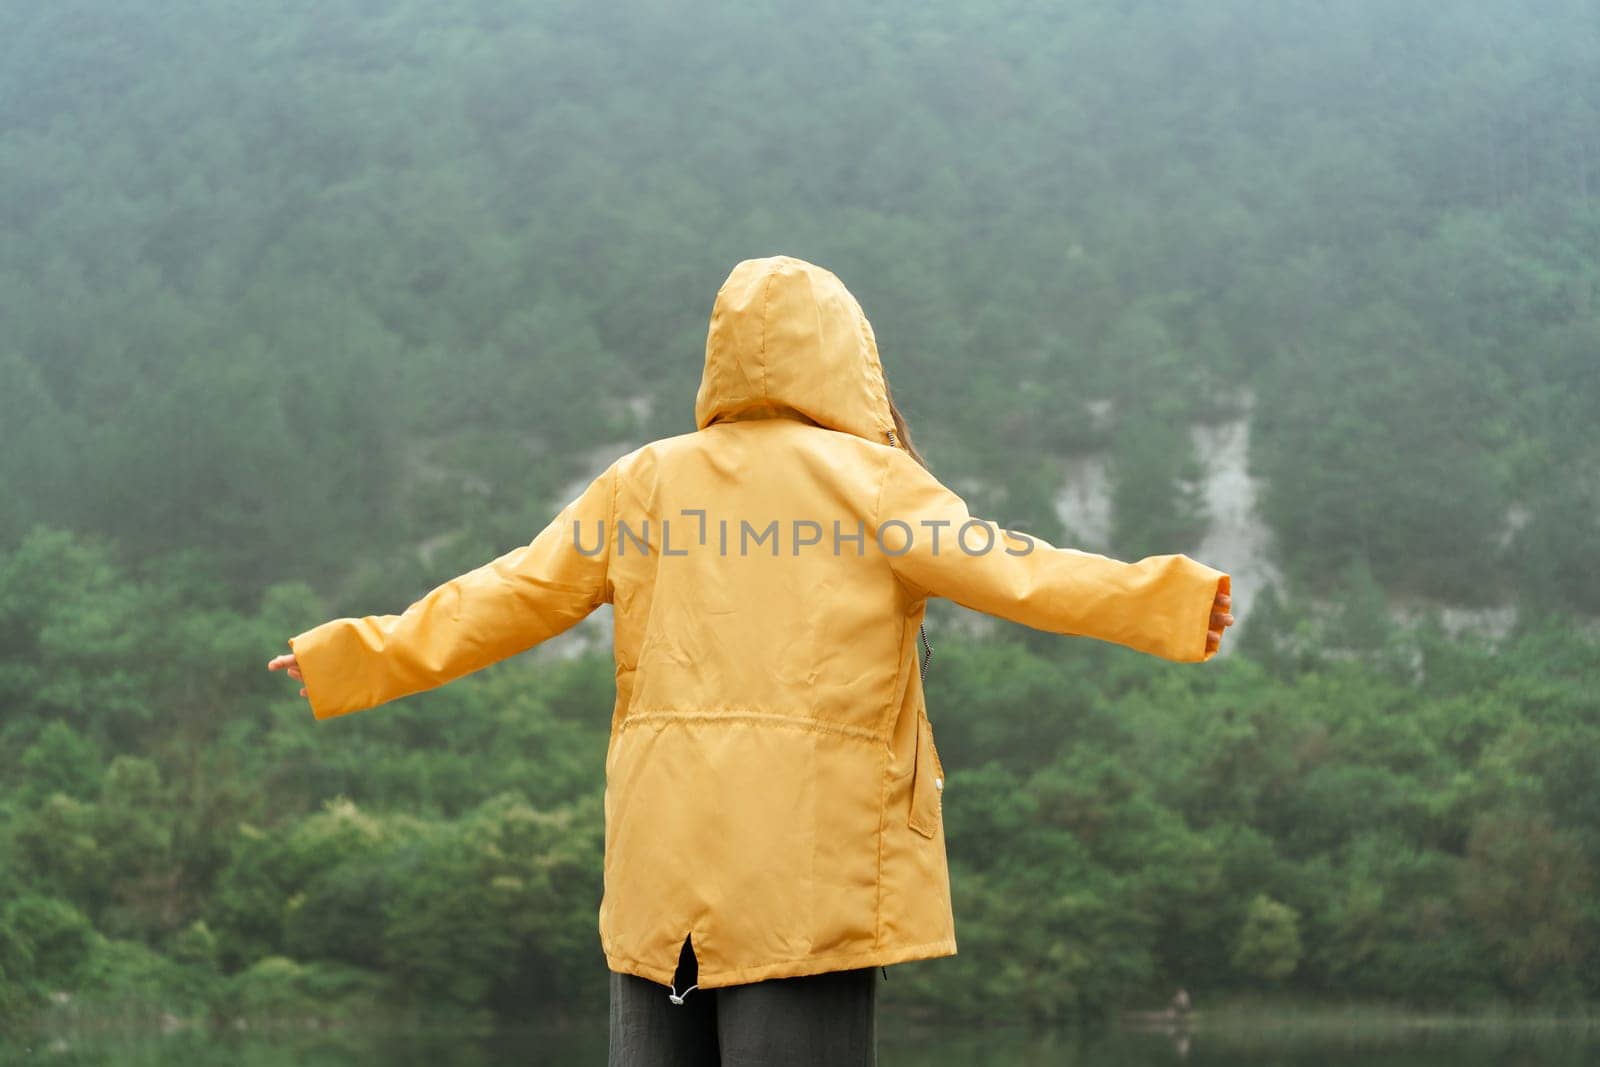 A person in a yellow jacket is standing in the rain, looking up at the sky. Scene is peaceful and serene, as the person seems to be enjoying the moment despite the rain